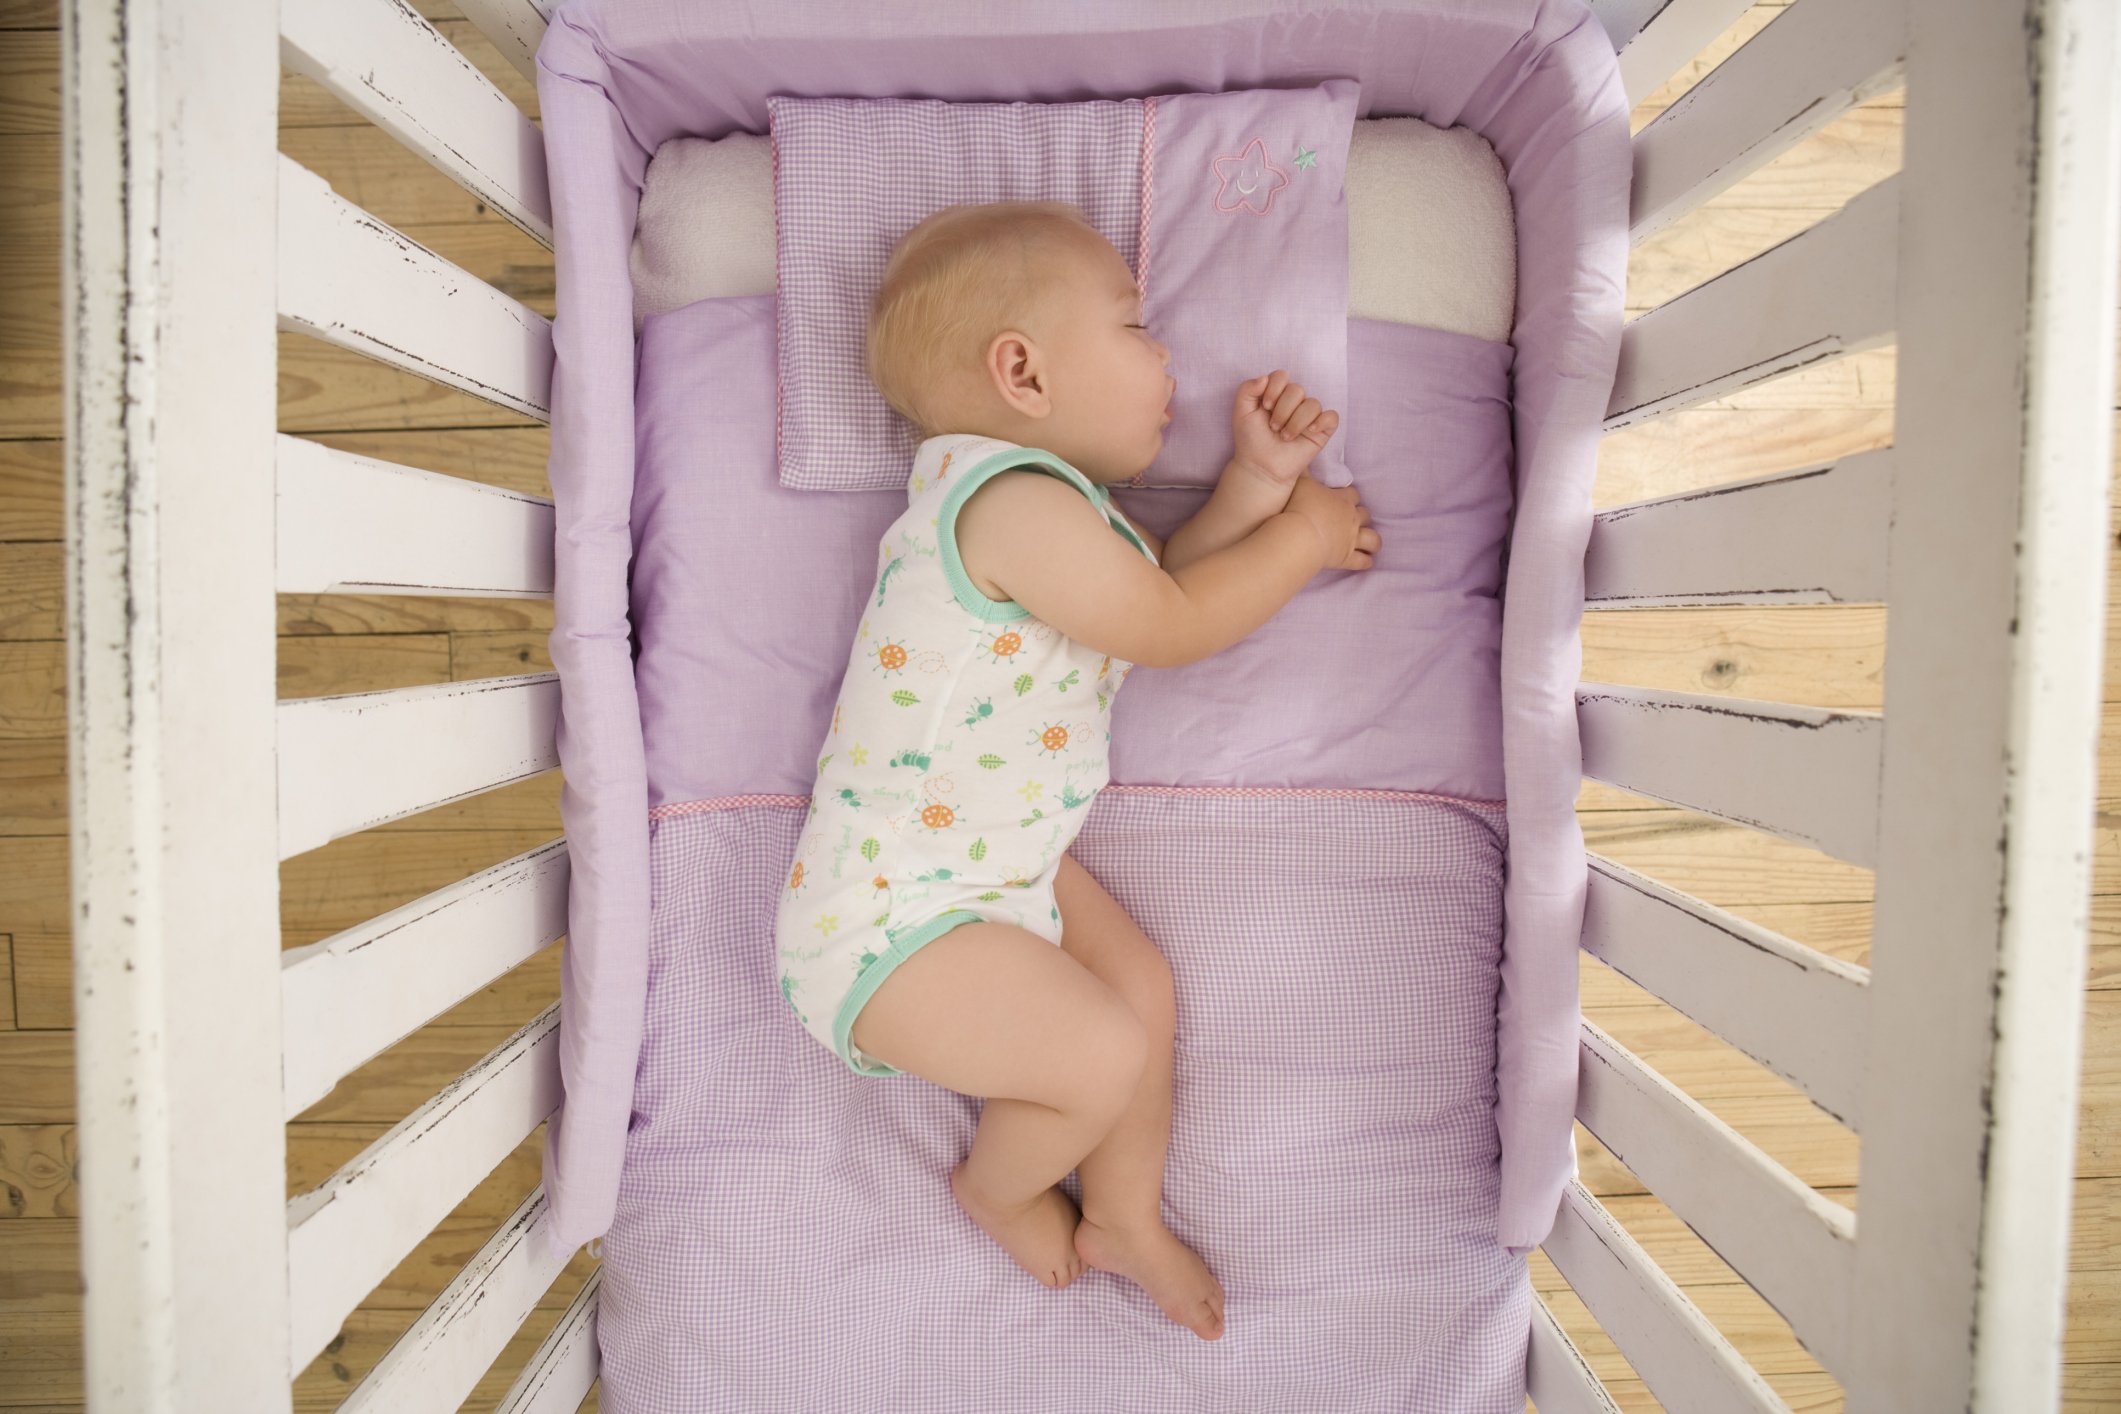 How to Get a Baby to Sleep in a Crib After Co